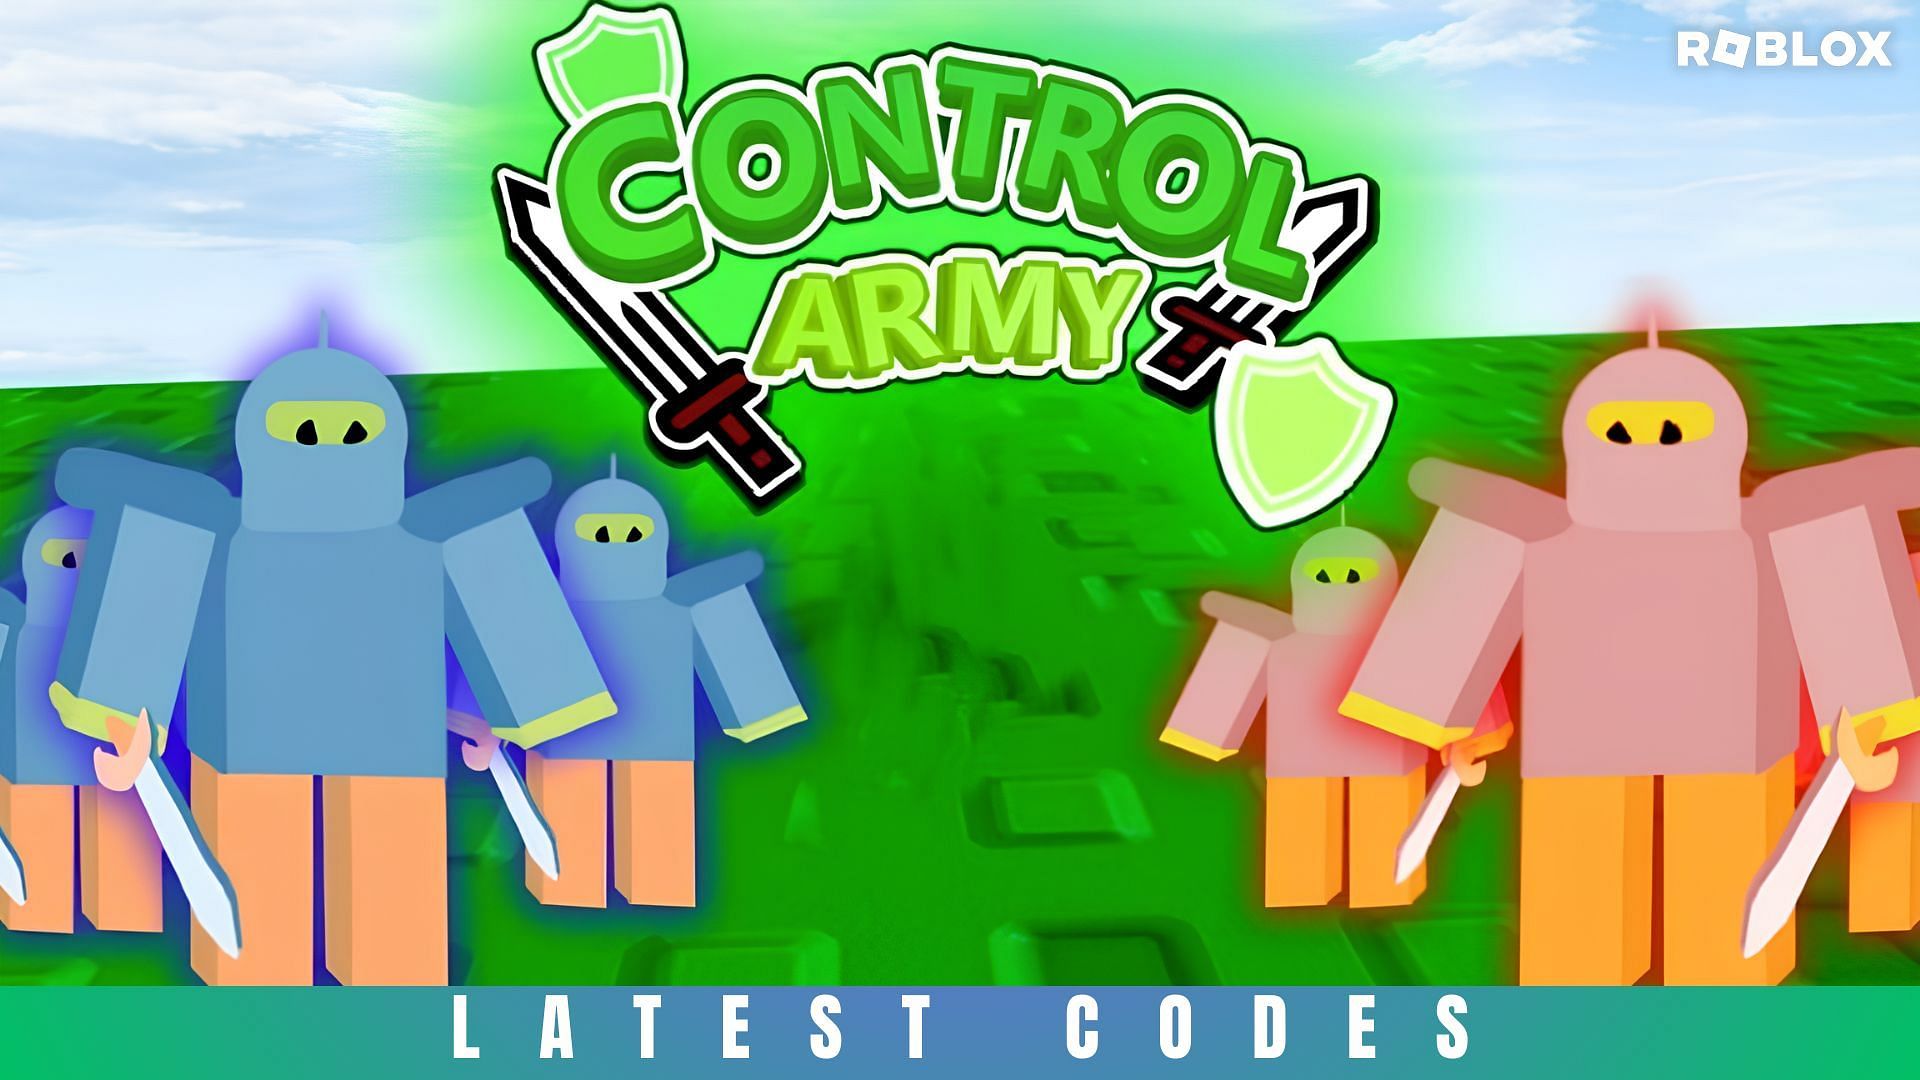 Lead your army to glory in Control Army 2. (Image via Sportskeeda)